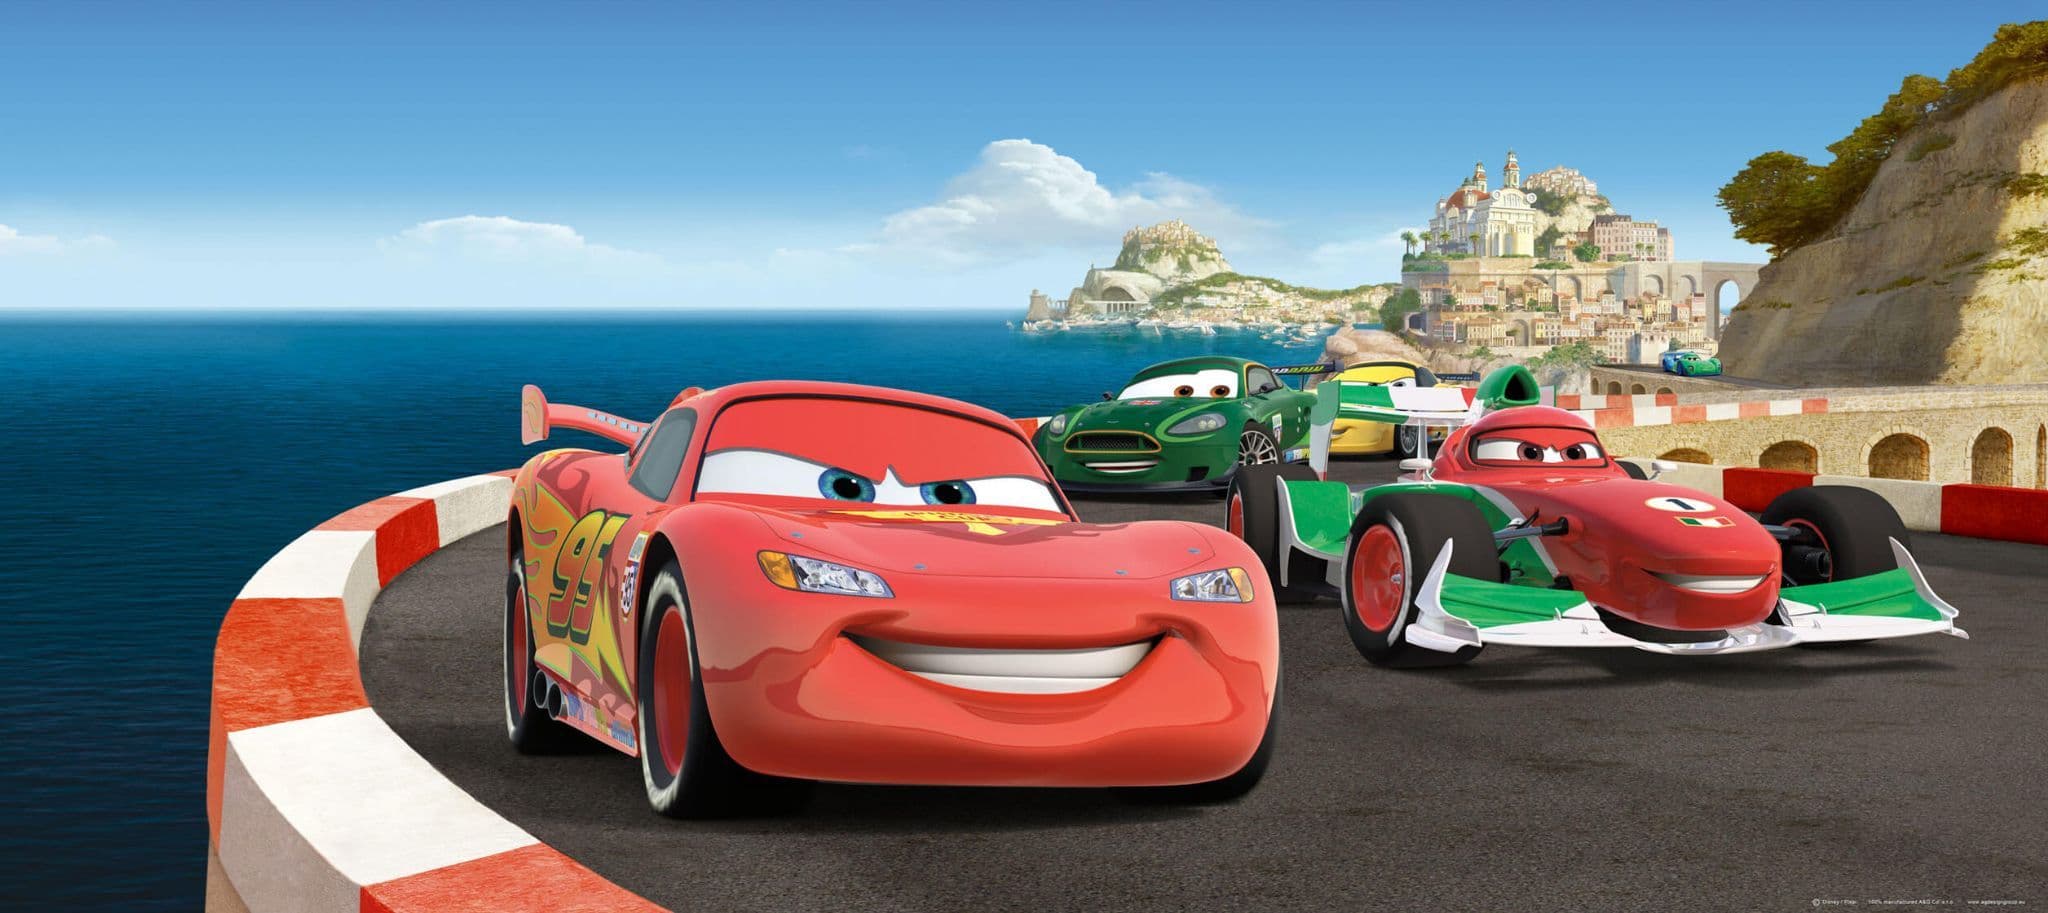 Disney Cars 3 Wallpapers - Top Free Disney Cars 3 Backgrounds ...